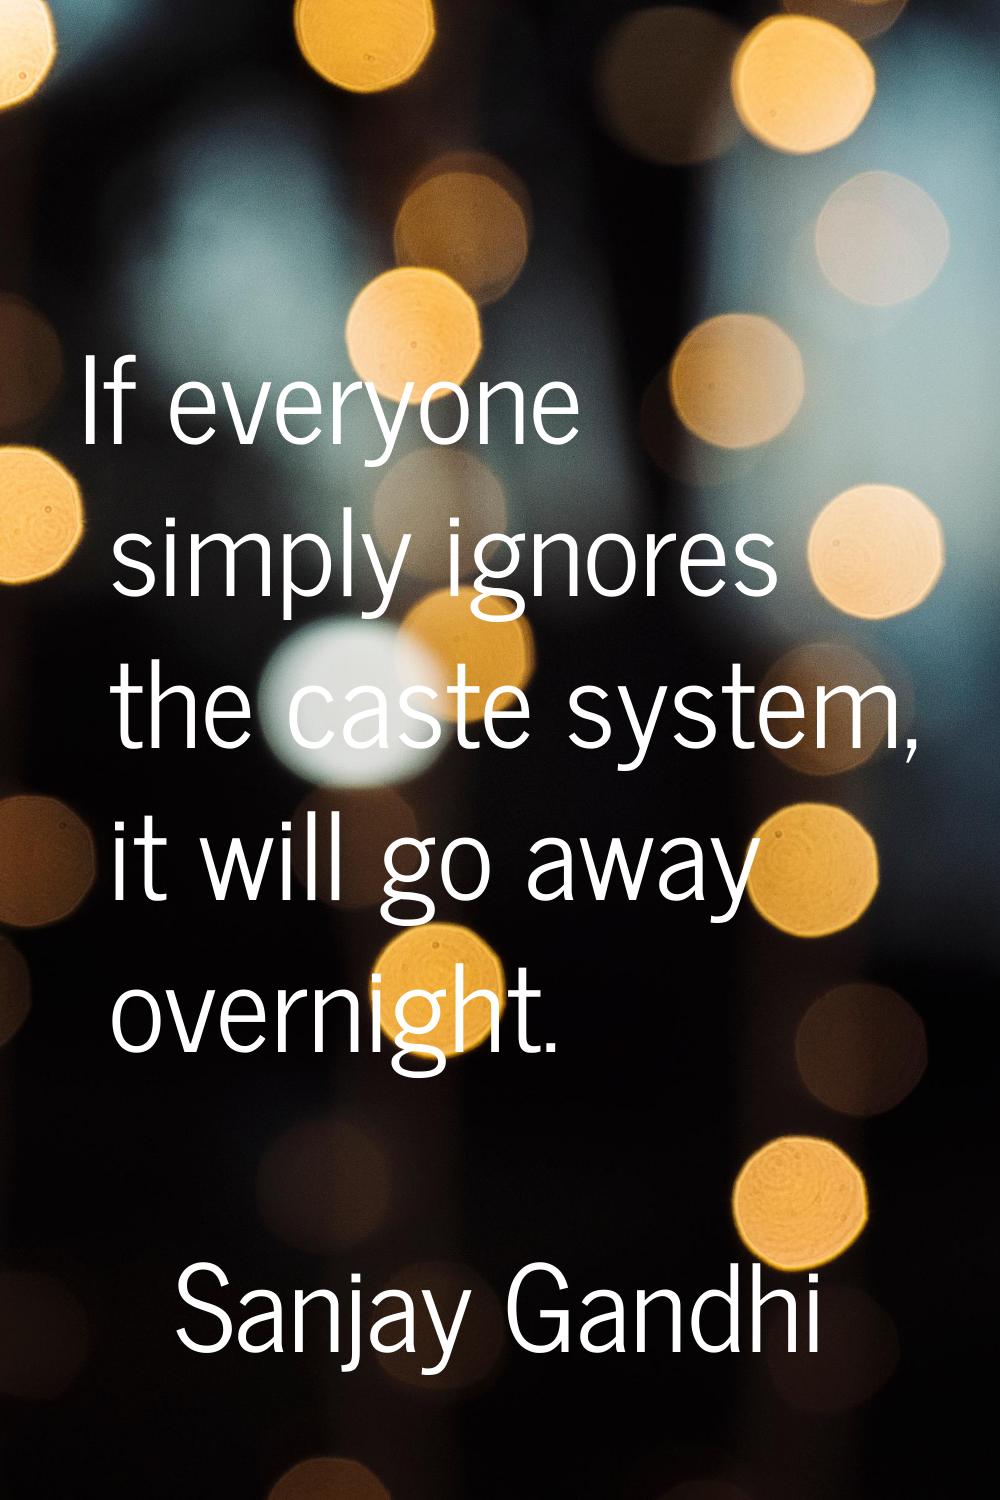 If everyone simply ignores the caste system, it will go away overnight.